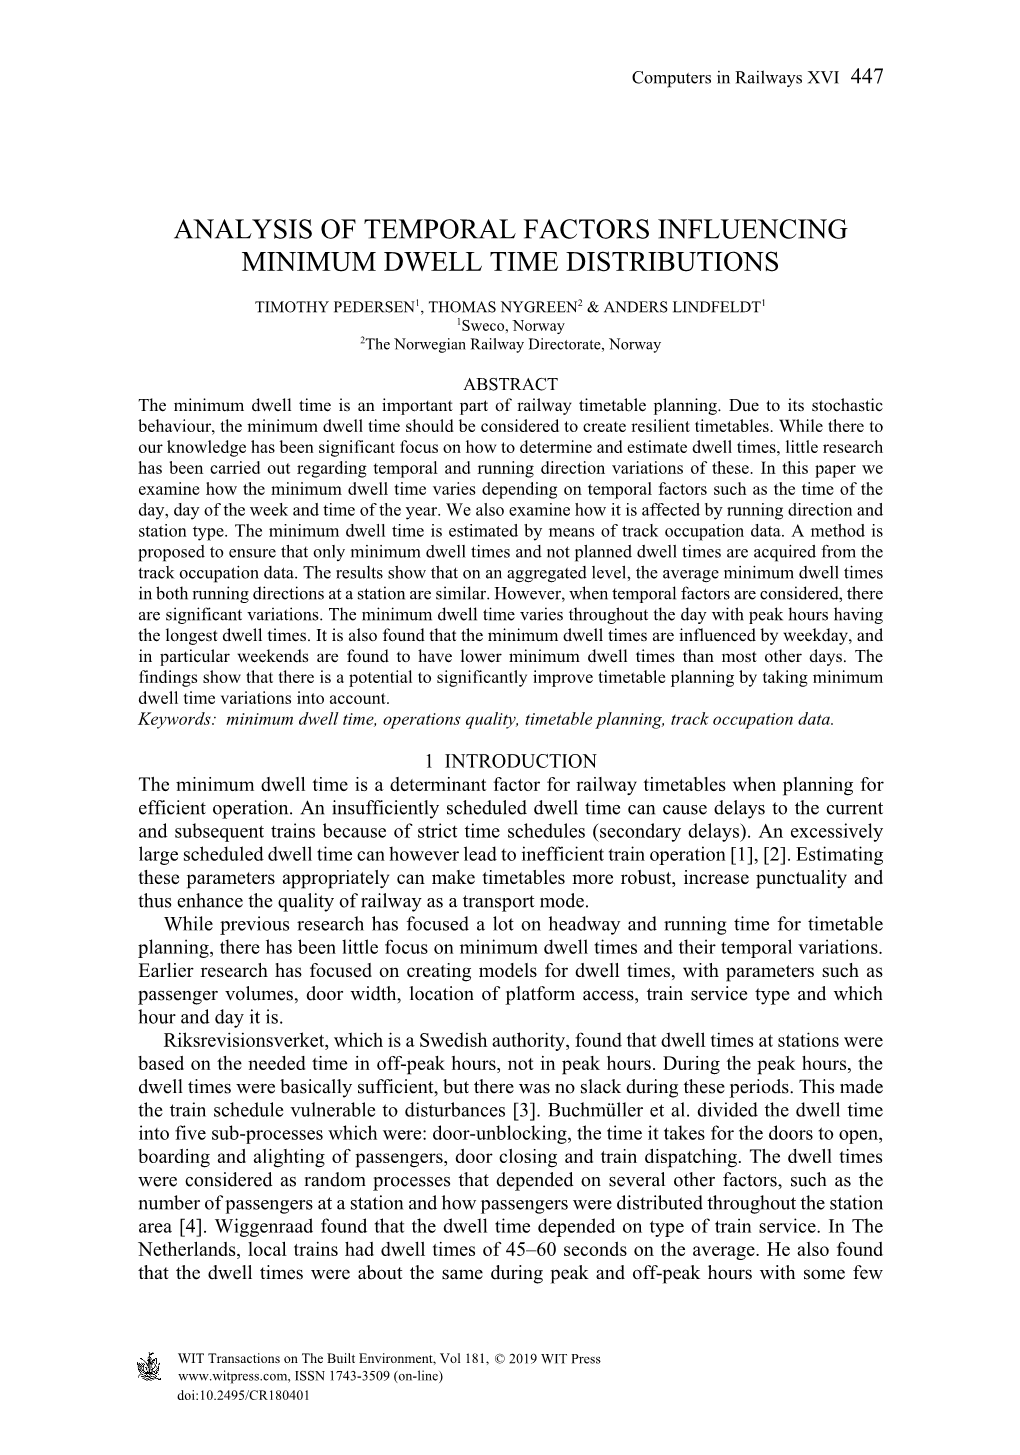 Analysis of Temporal Factors Influencing Minimum Dwell Time Distributions